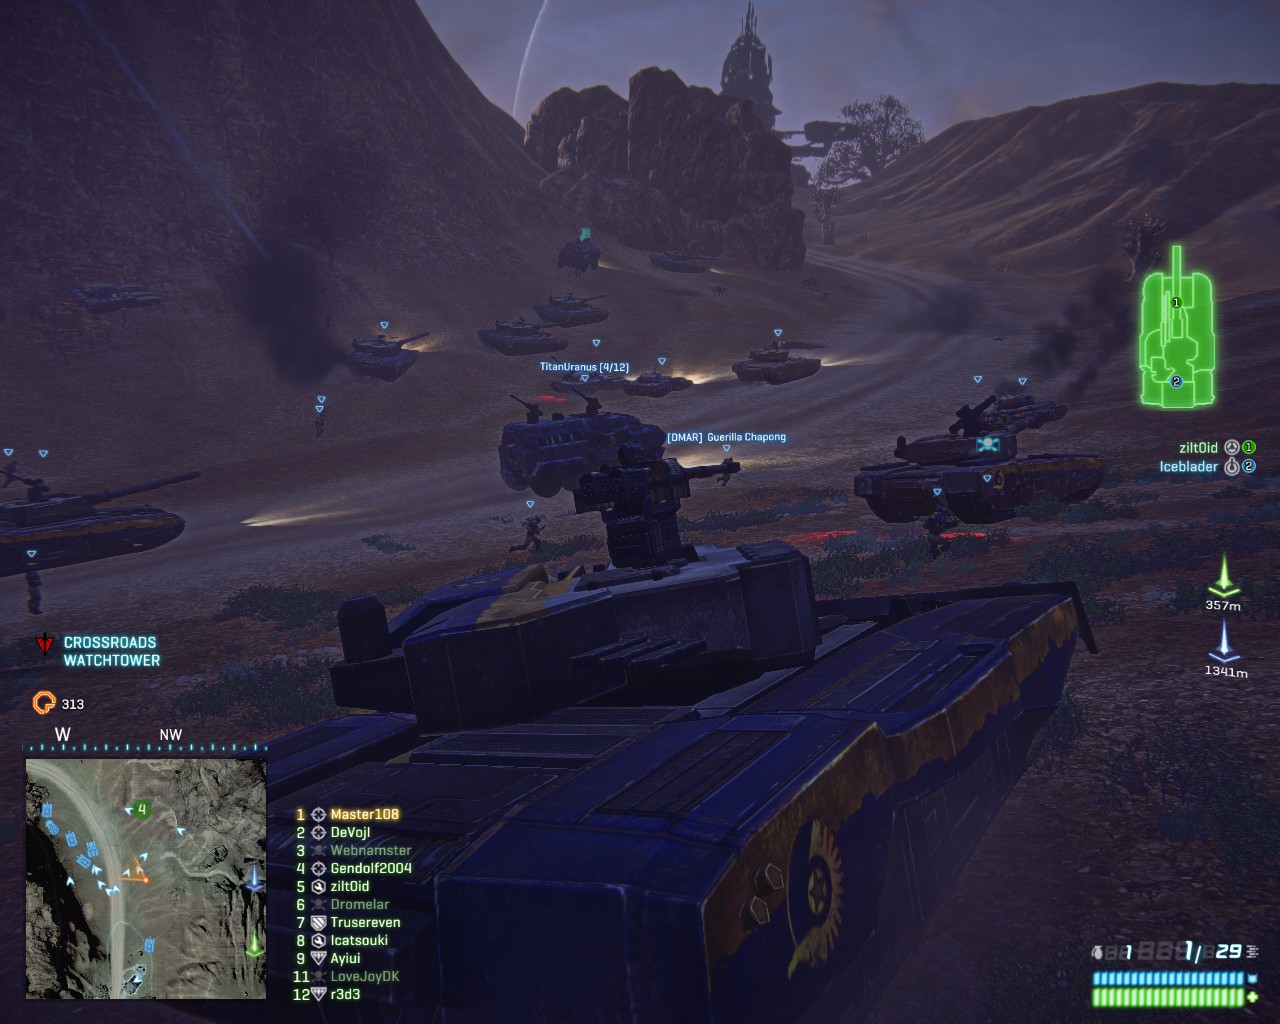 Forget Heavy Assault, this is how you attack enemy tanks.